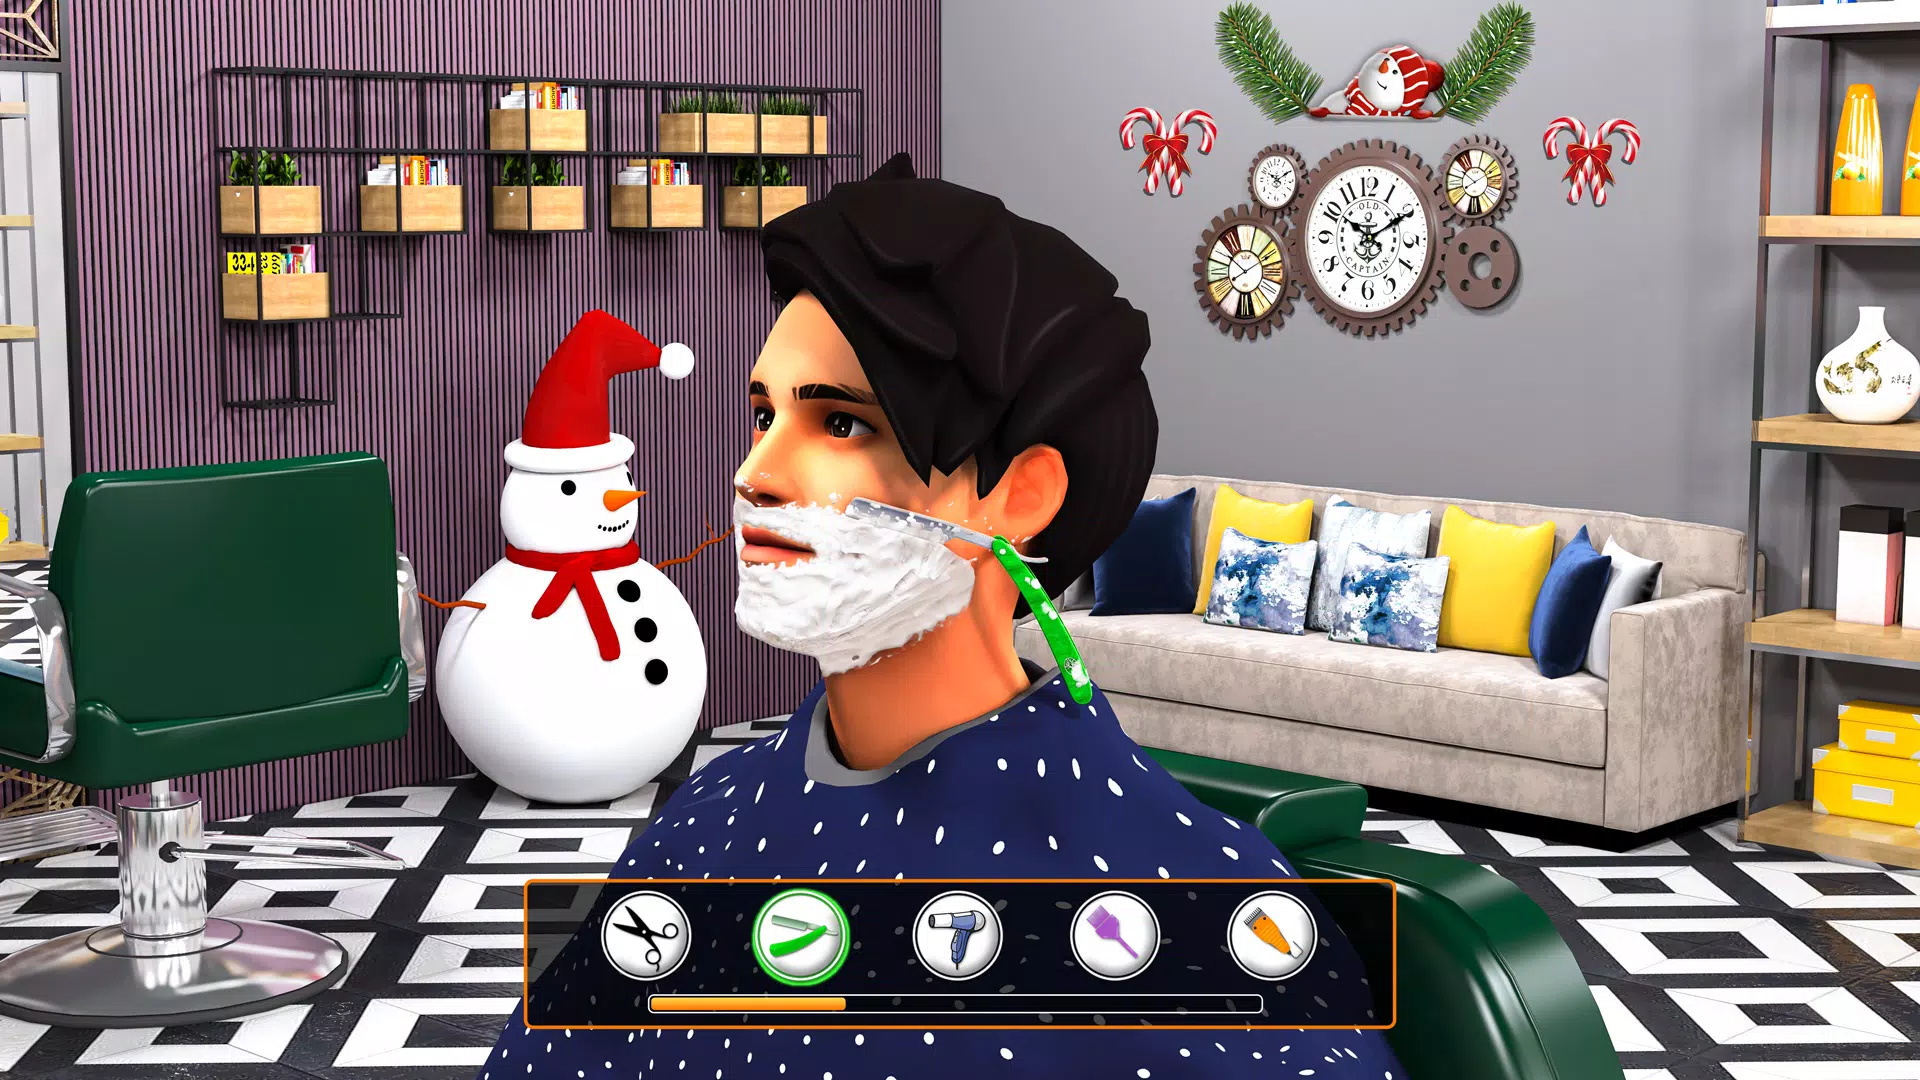 Barber Shop Hair Cut Sim Games APK for Android Download